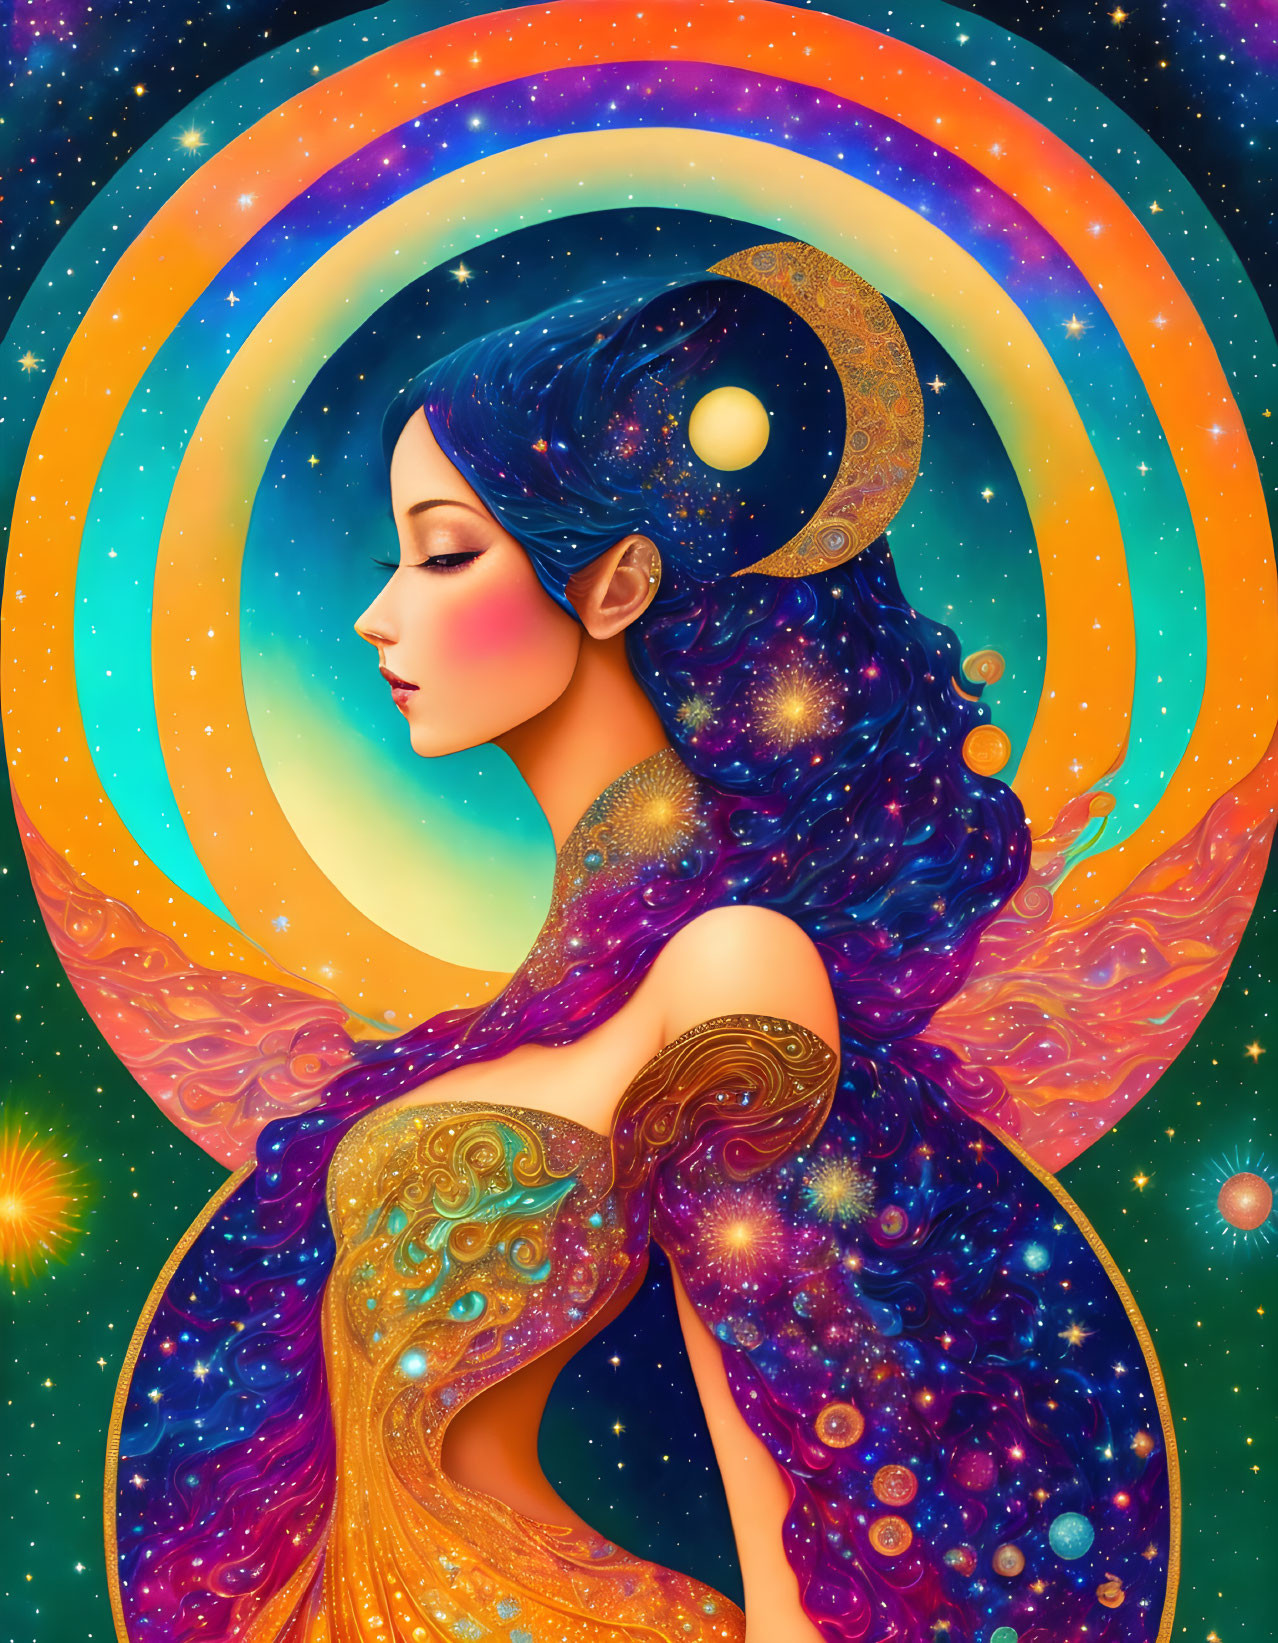 Colorful cosmic artwork: Celestial woman with starry hair and serene expression surrounded by rainbow rings